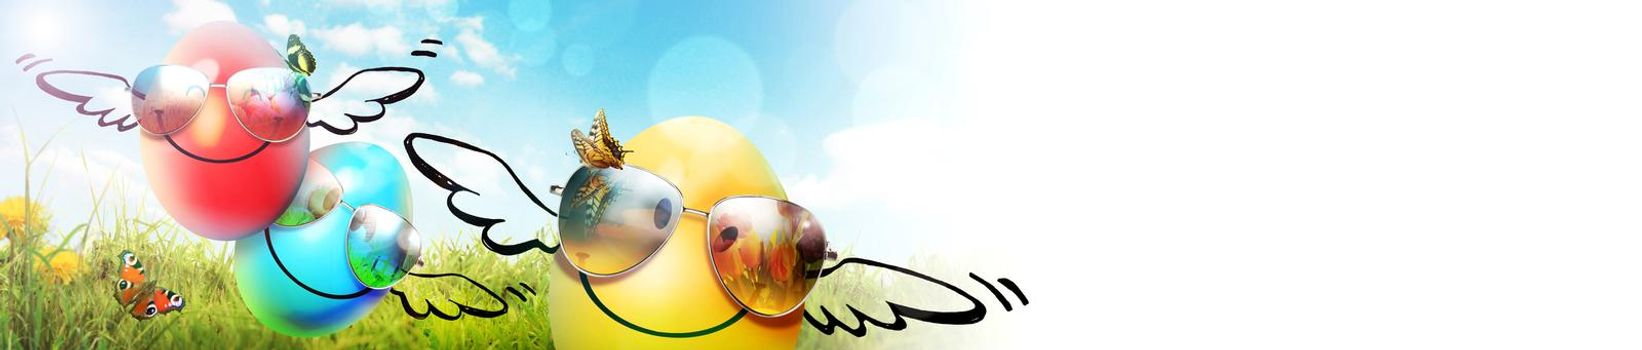 Beautiful Easter background with colorful Easter eggs